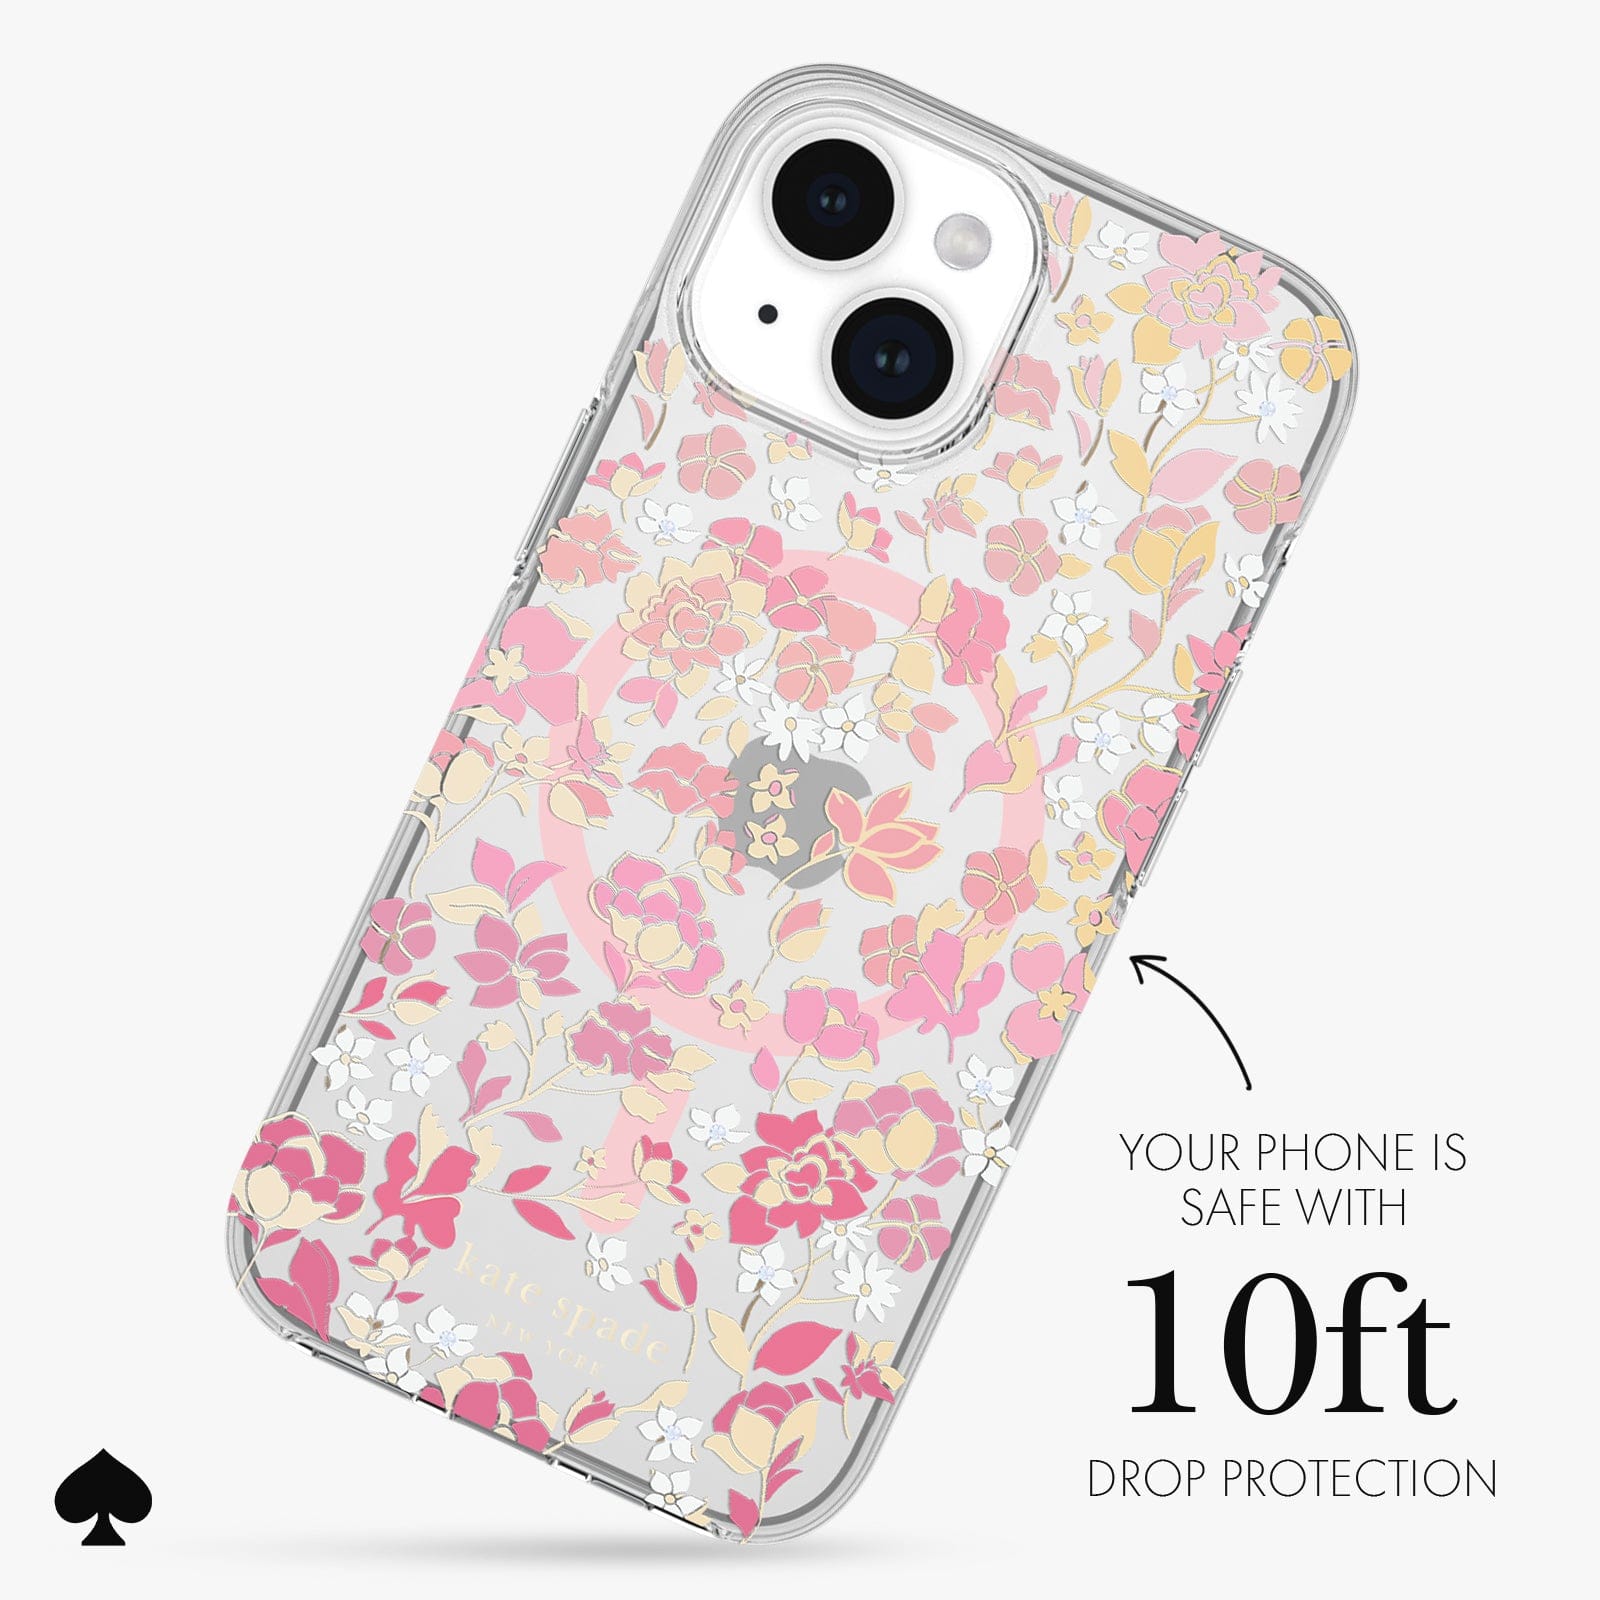 YOUR PHONE IS SAFE WITH 10FT DROP PROTECTION